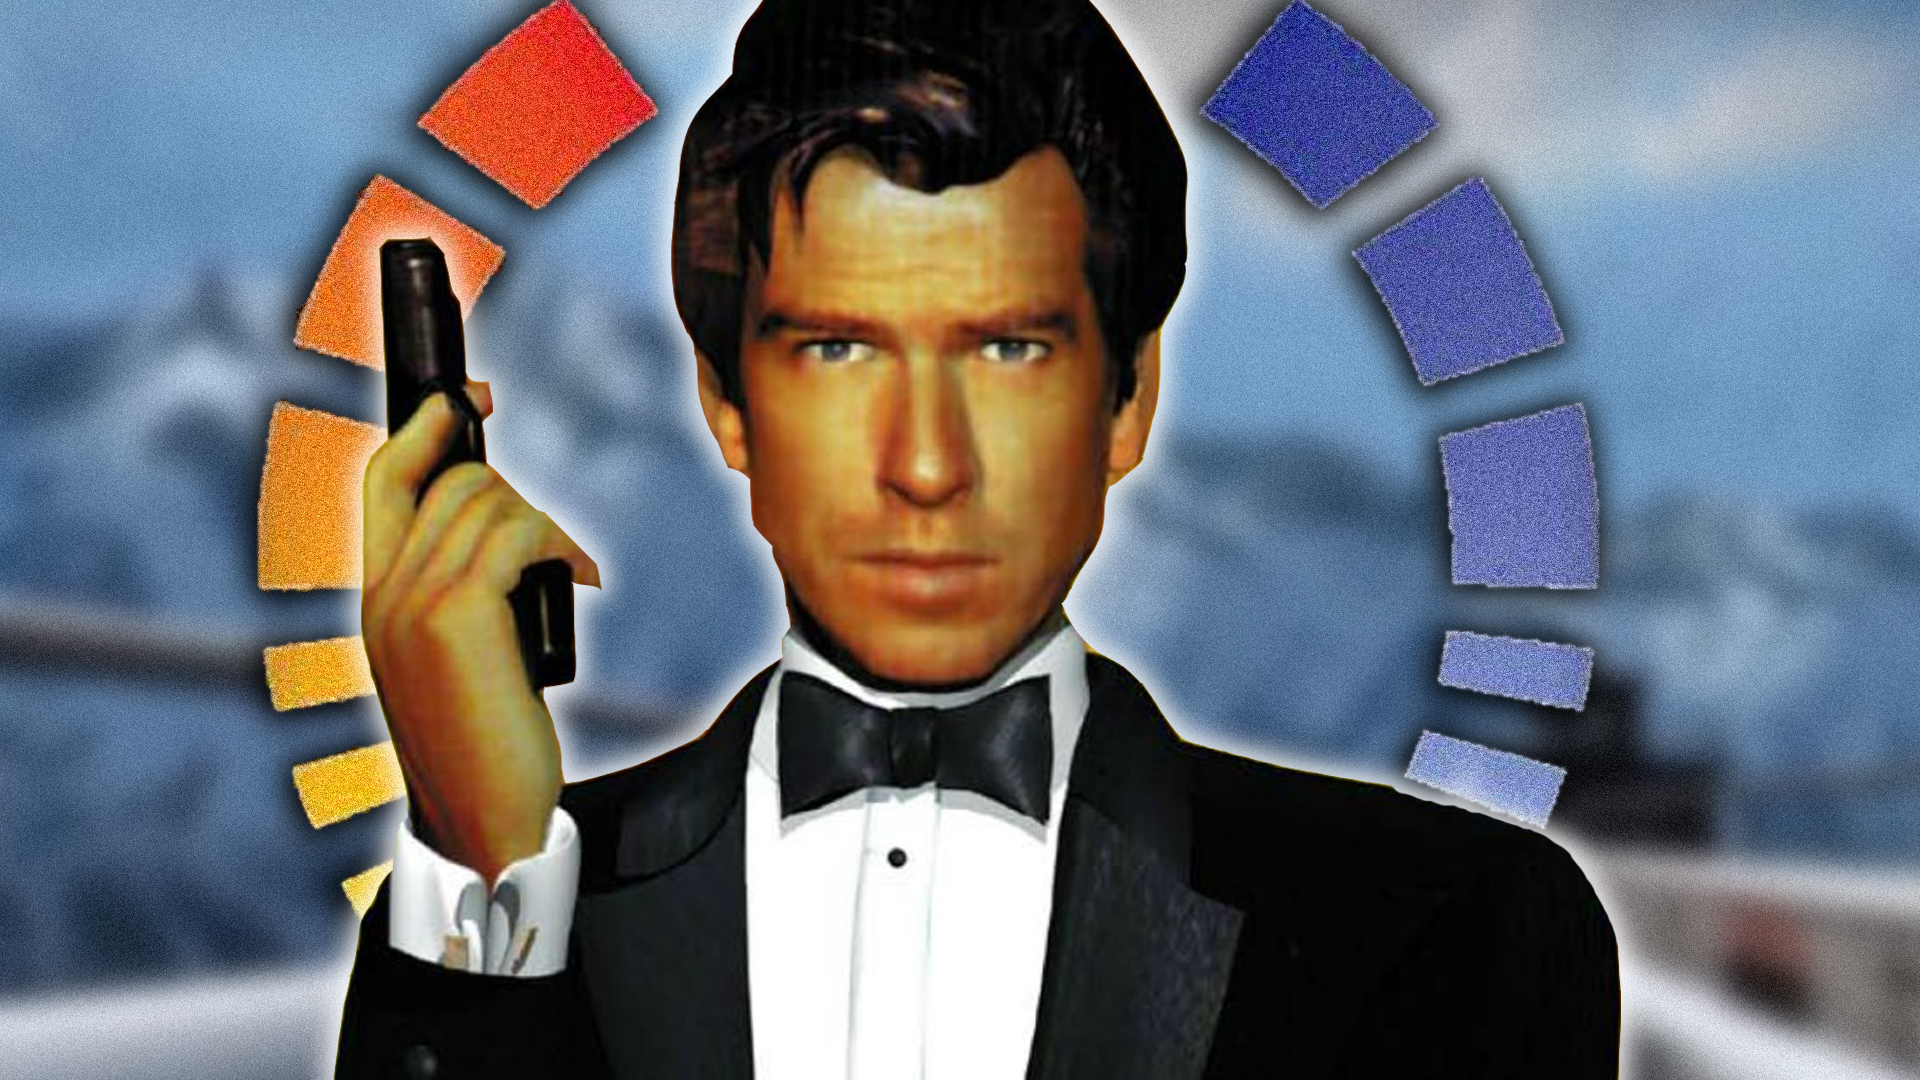 GoldenEye 007 Is Making A Glorious Comeback On Xbox And Switch Online